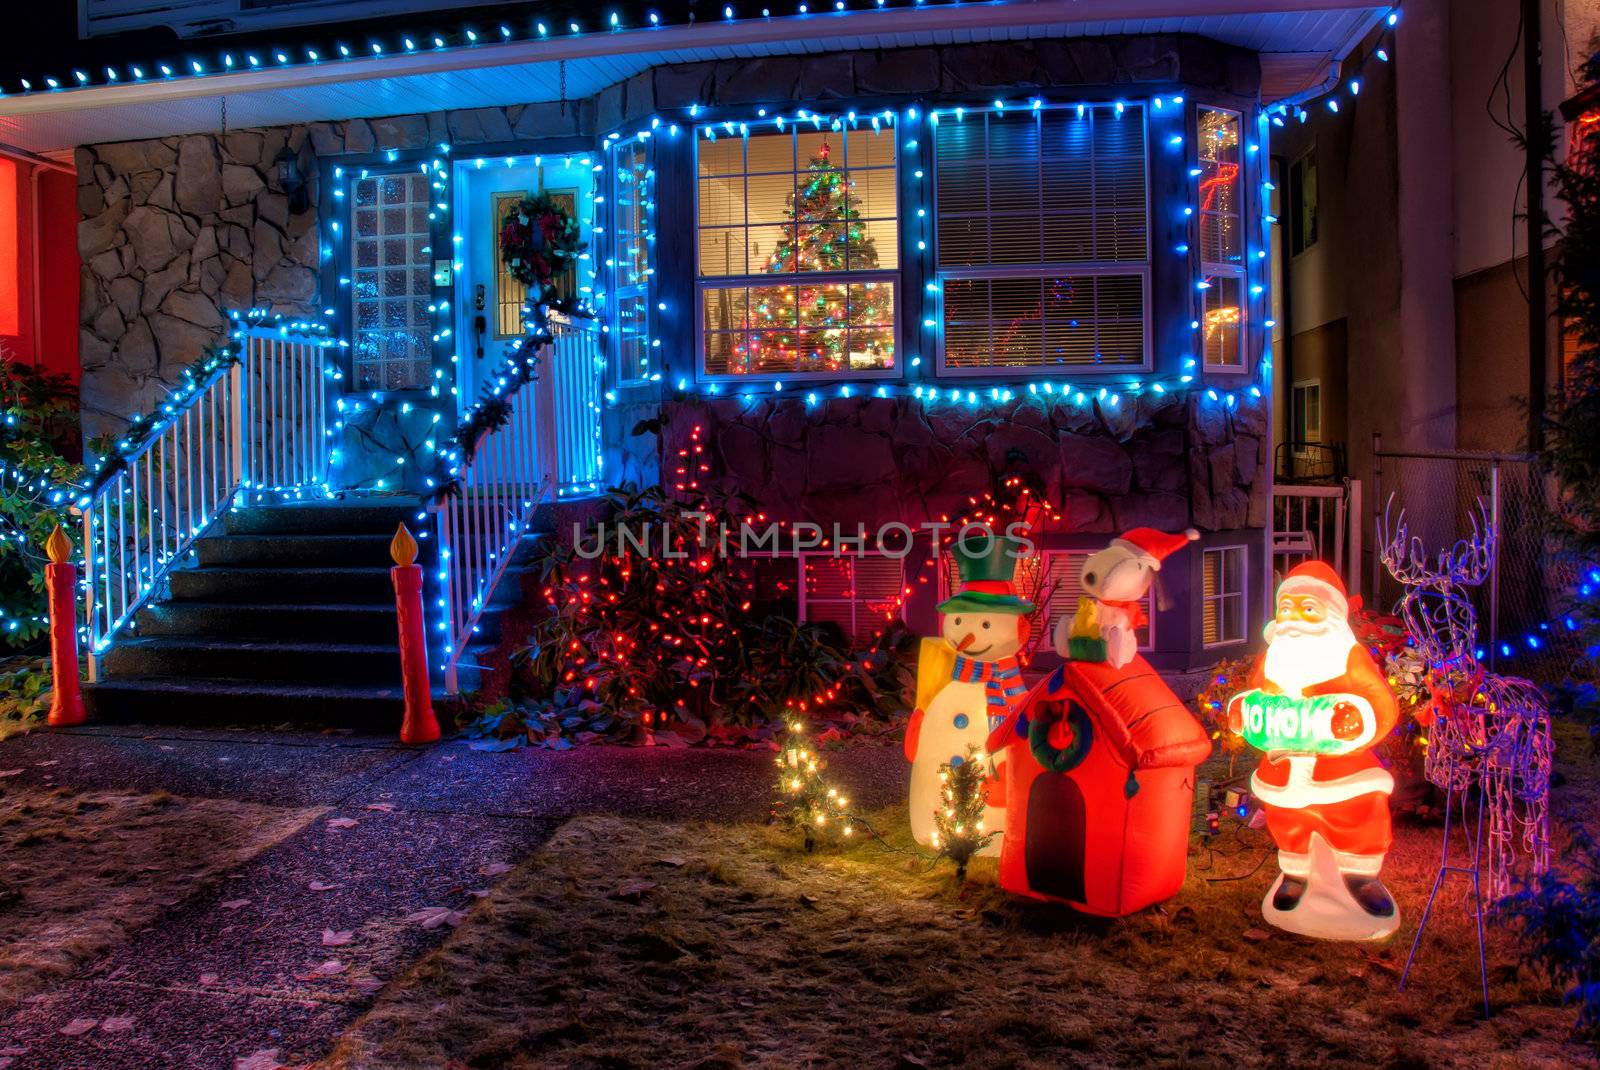 House Decorated with Christmas Lights and ornaments in front lawn